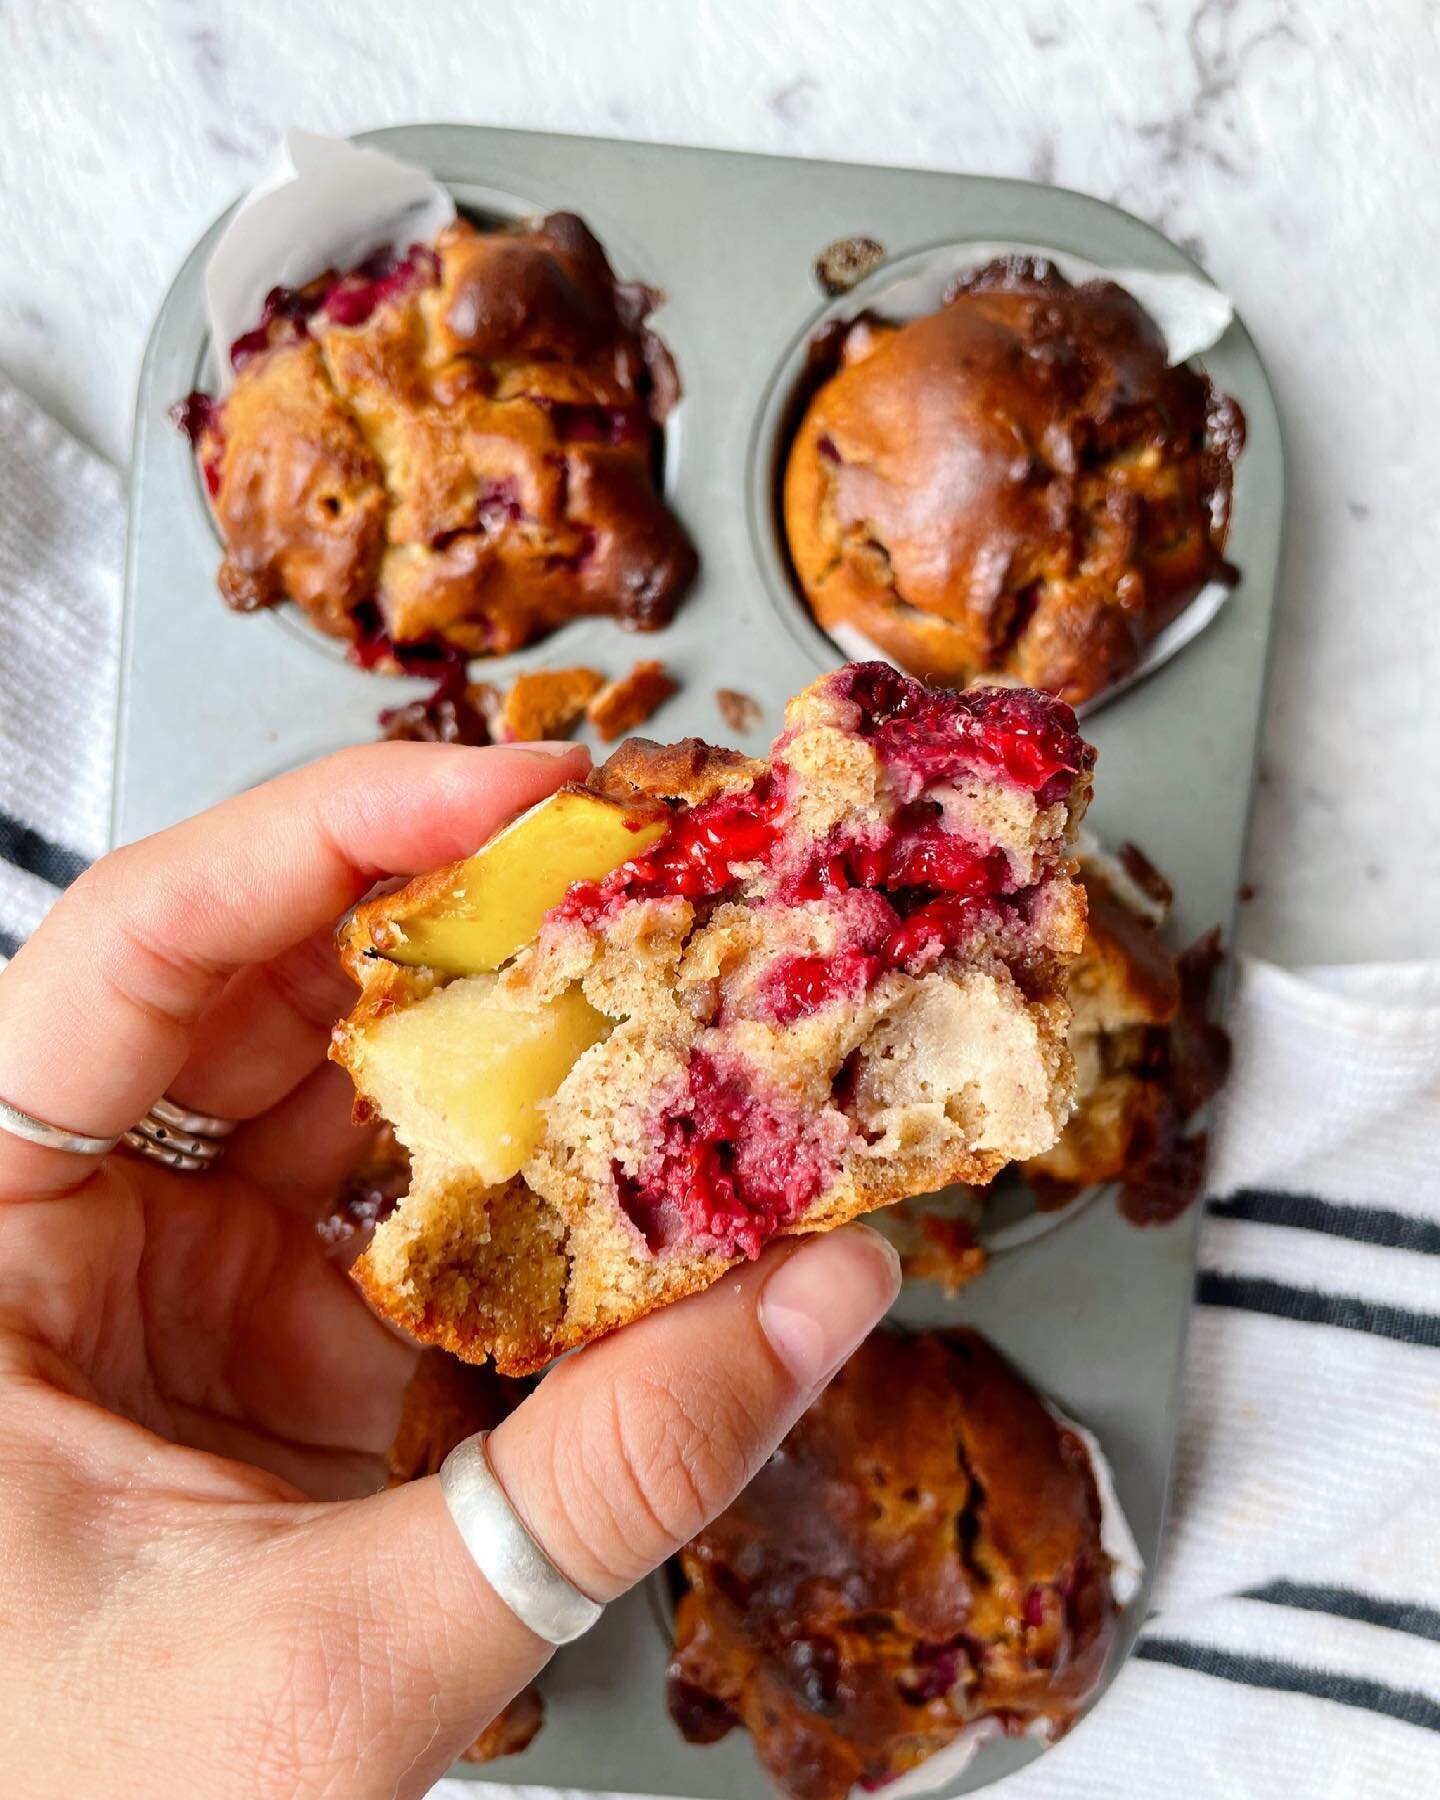 WHITE CHOC , RASPBERRY, APPLE &amp; CINNAMON MUFFINS 🍏 

Sydney friends we&rsquo;re in for a rainy week ahead! Perfect weather for baking 😋

Try these delicious gluten &amp; dairy free muffins! 👇🏽

- 1 cup almond meal 
- 1/2 cup vanilla protein (